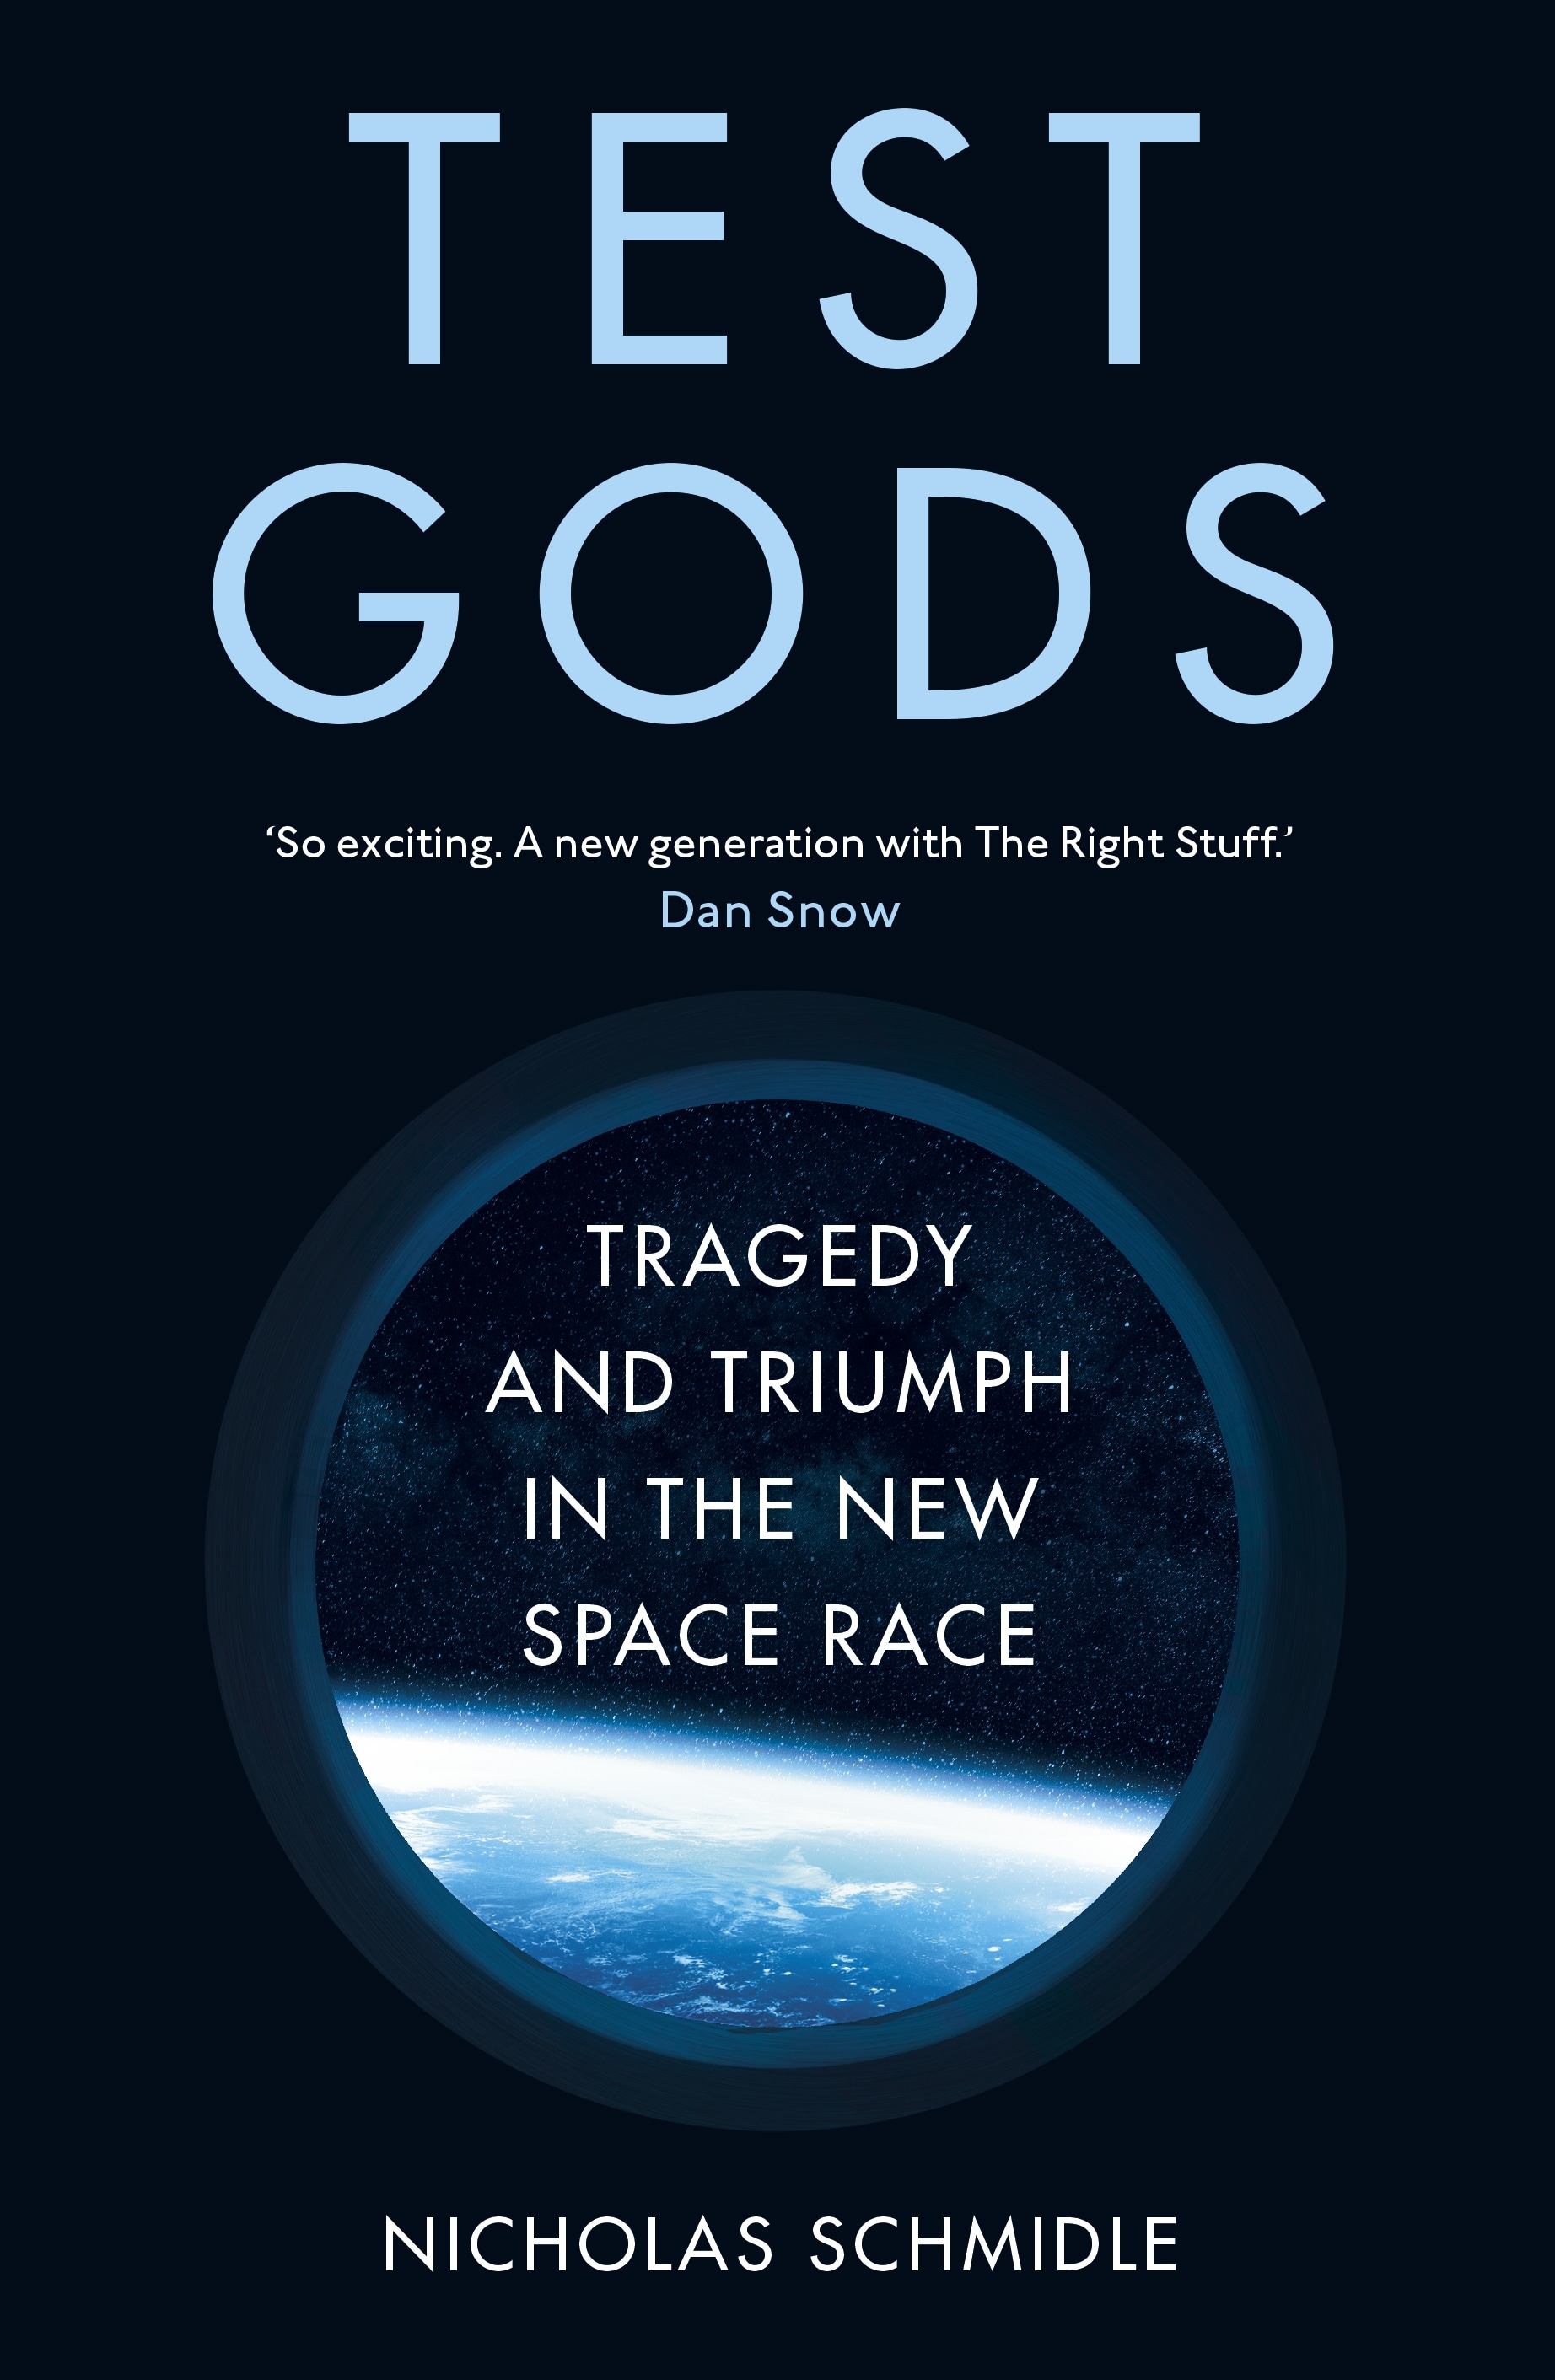 Book “Test Gods” by Nicholas Schmidle — May 6, 2021